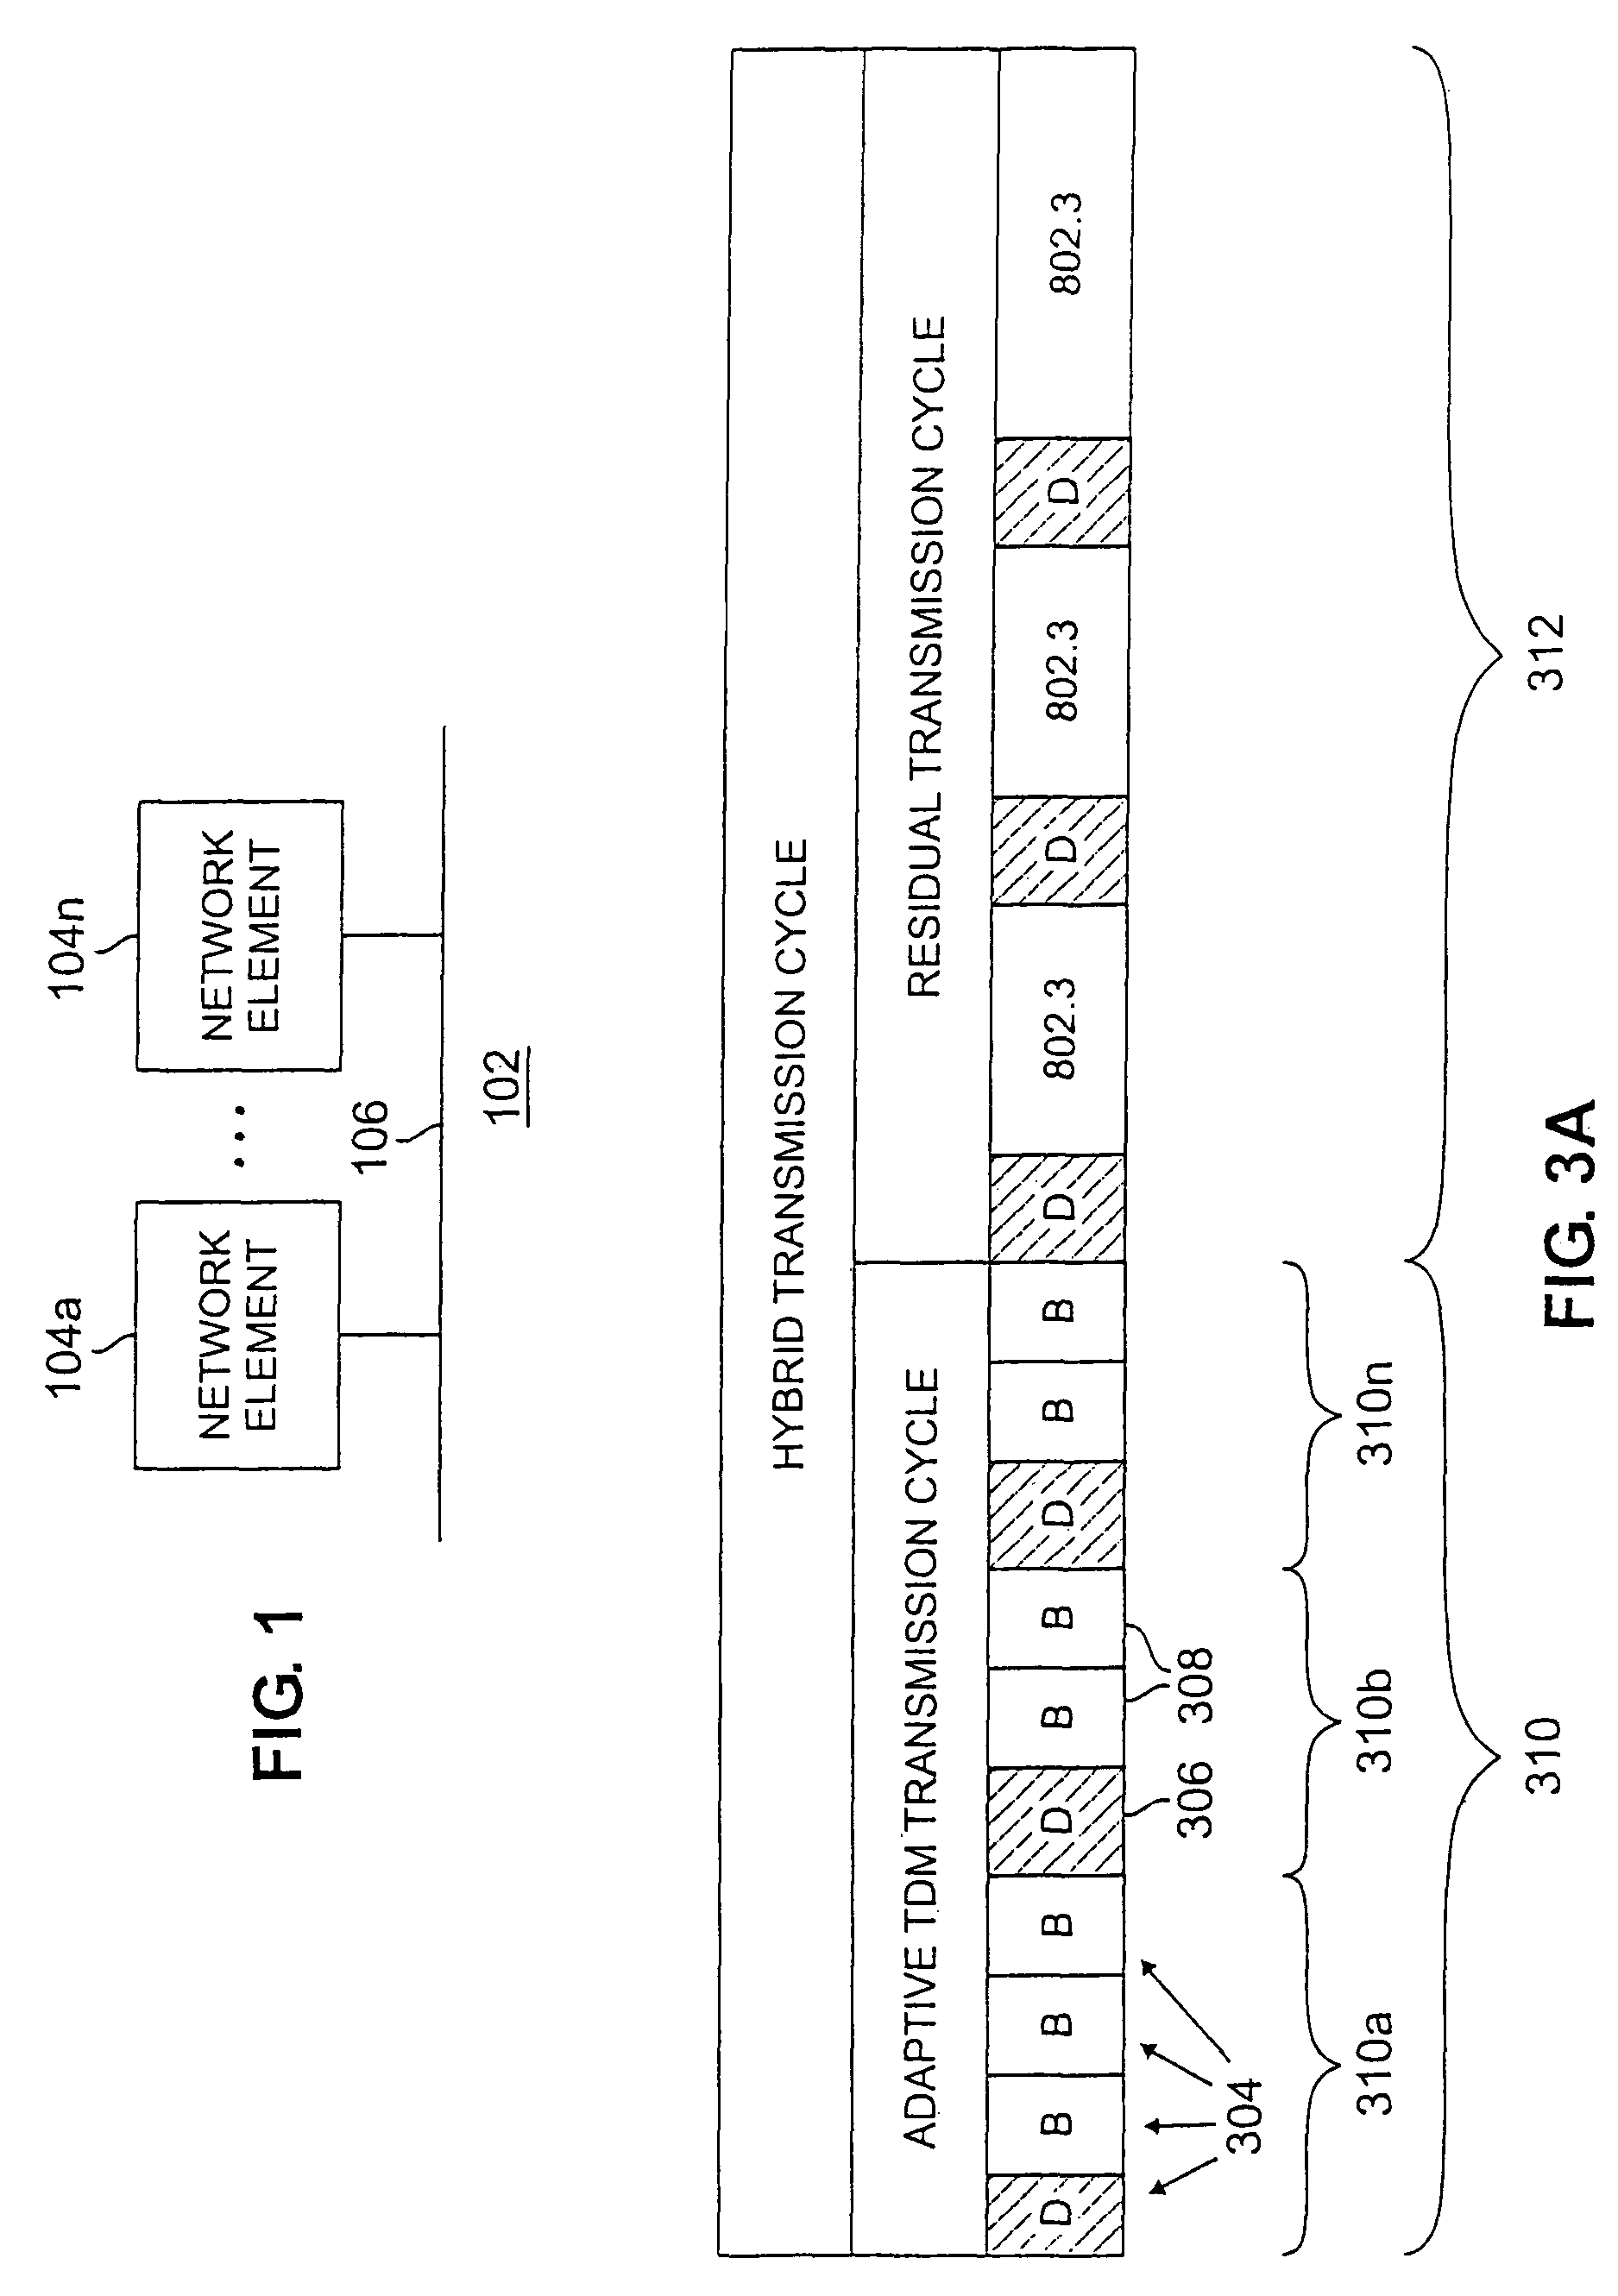 Adaptive transmission in multi-access asynchronous channels